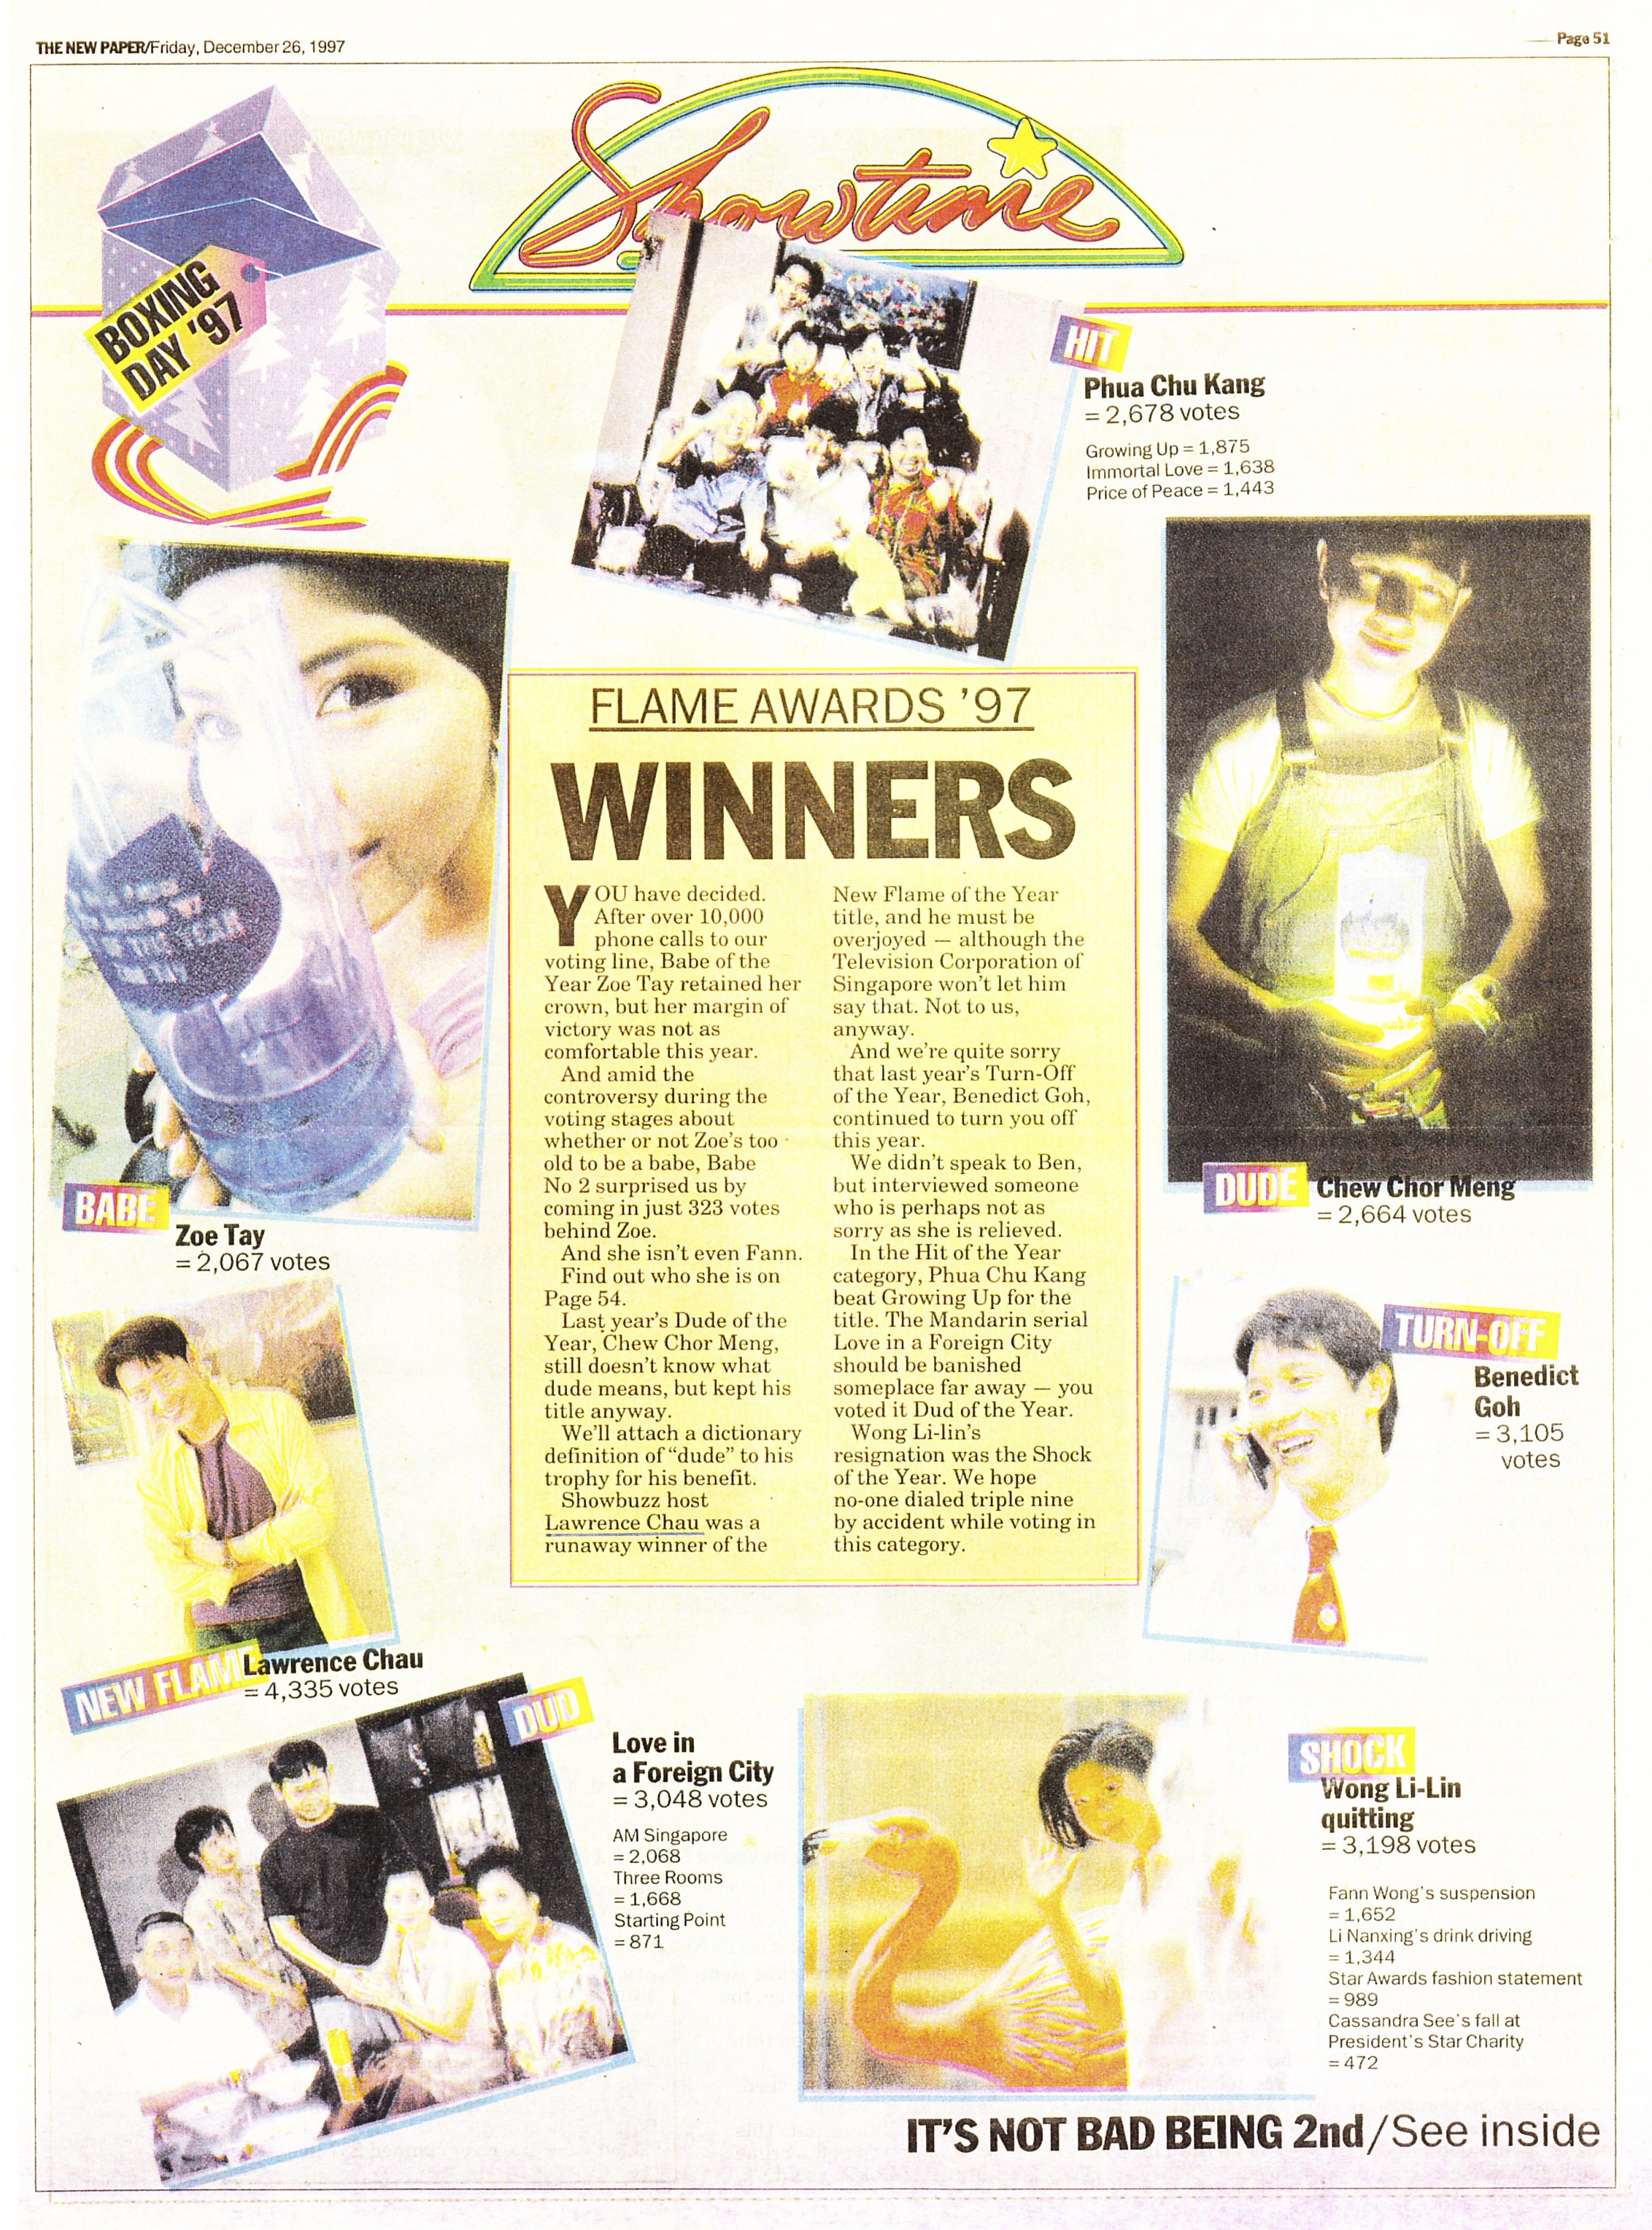 Viewers and readers of The New Paper voted me the Best TV Newcomer in Singapore; a landslide victory -- woo hoo!